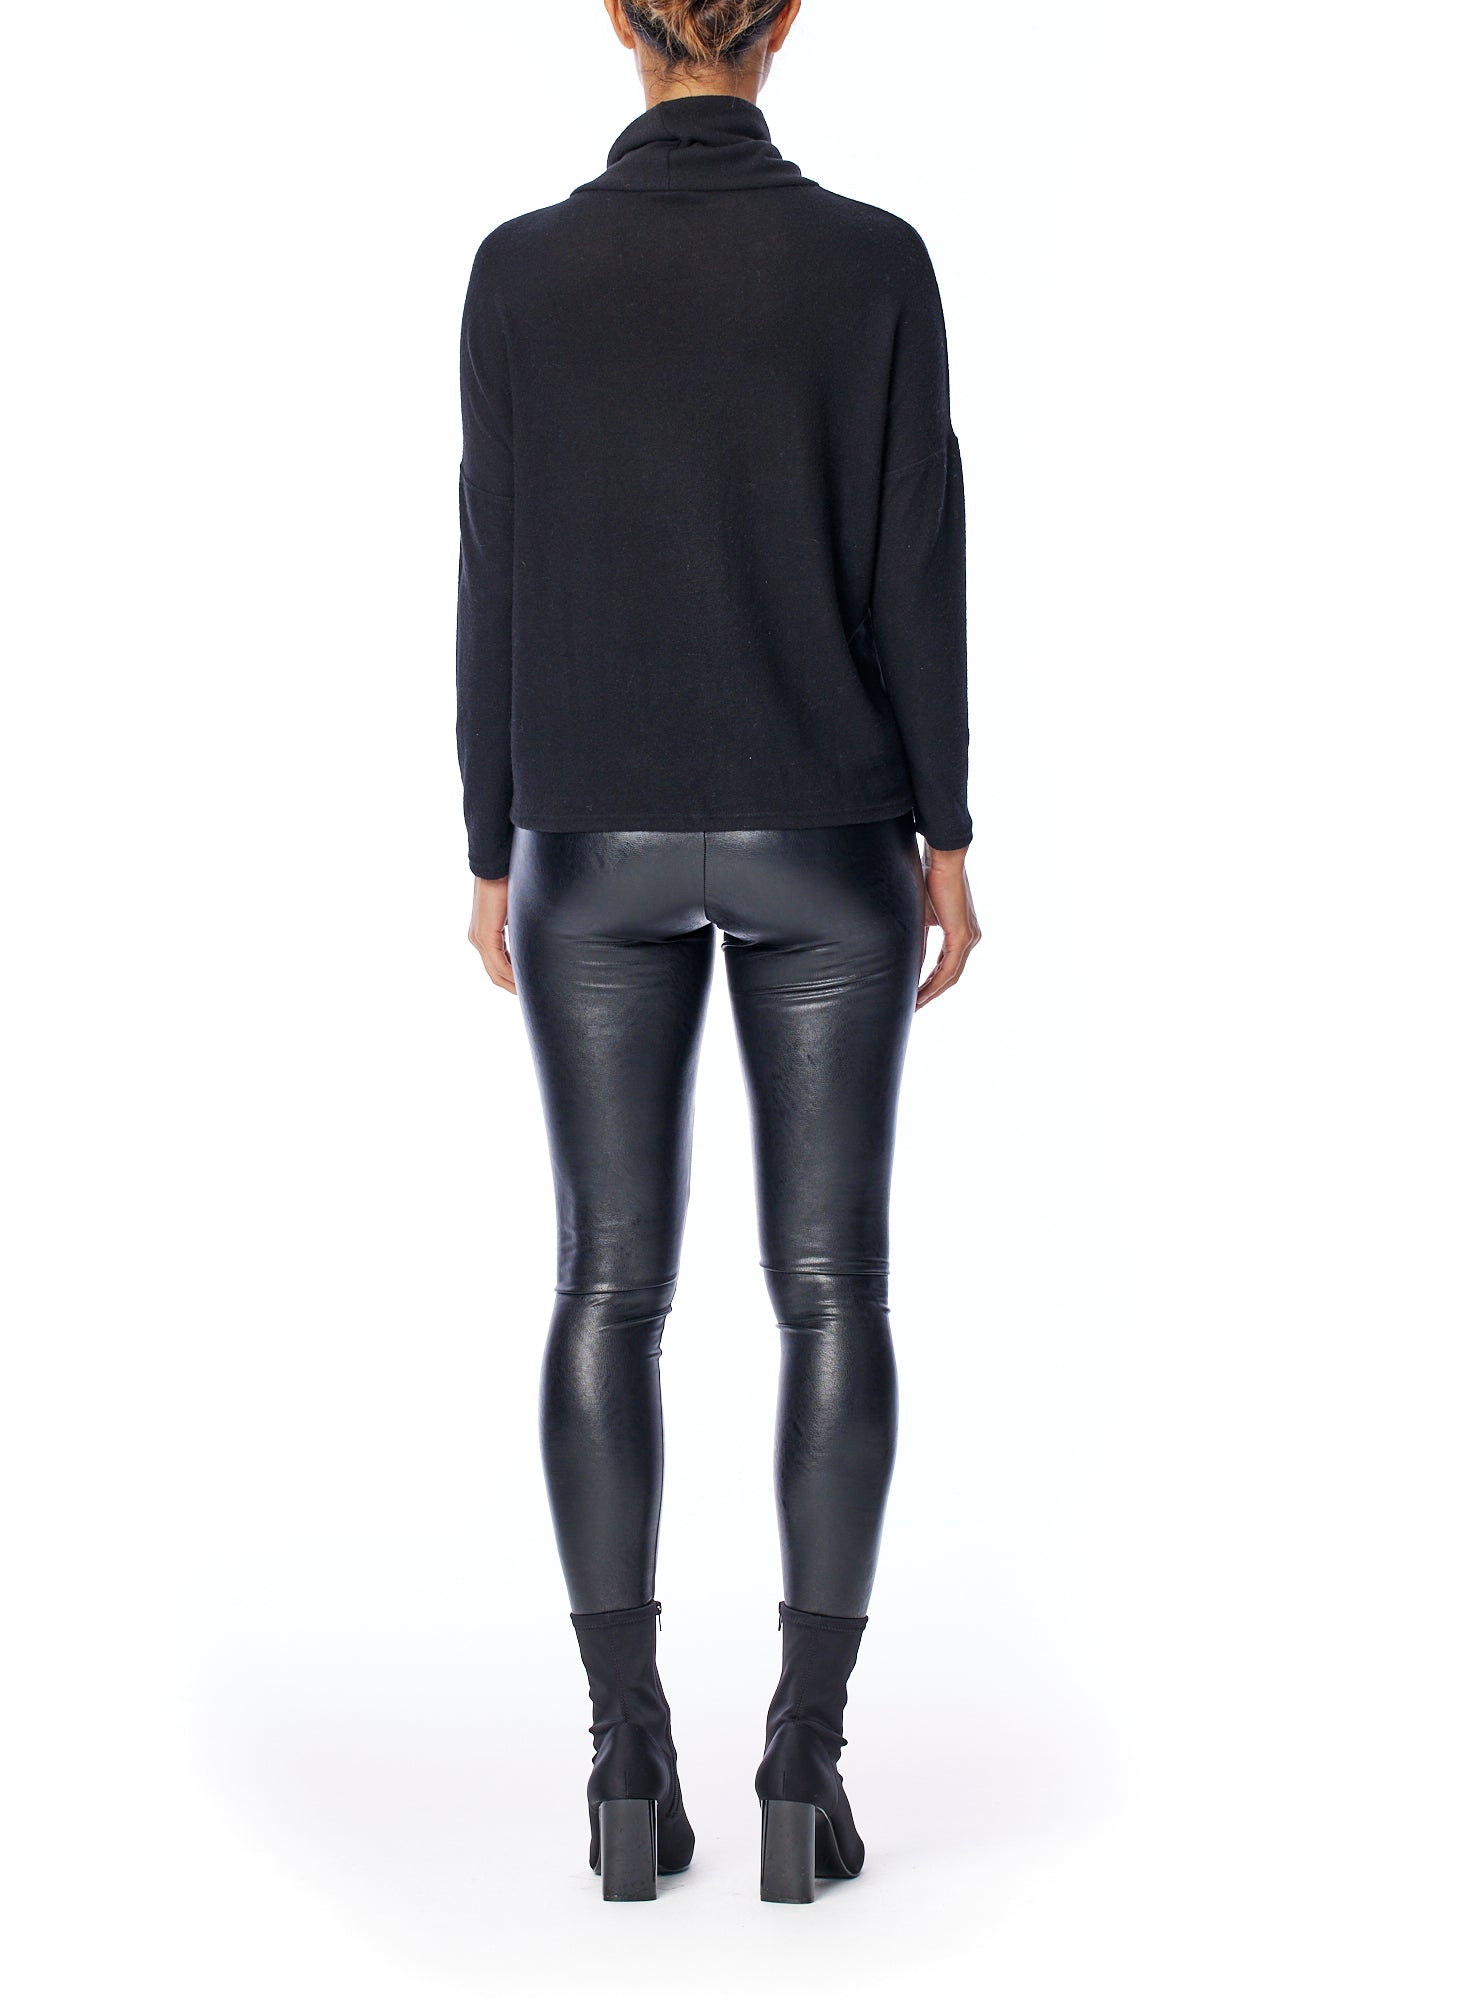 turtleneck sweater with long sleeves, relaxed fit, cross seam detailing and drop shoulder in black